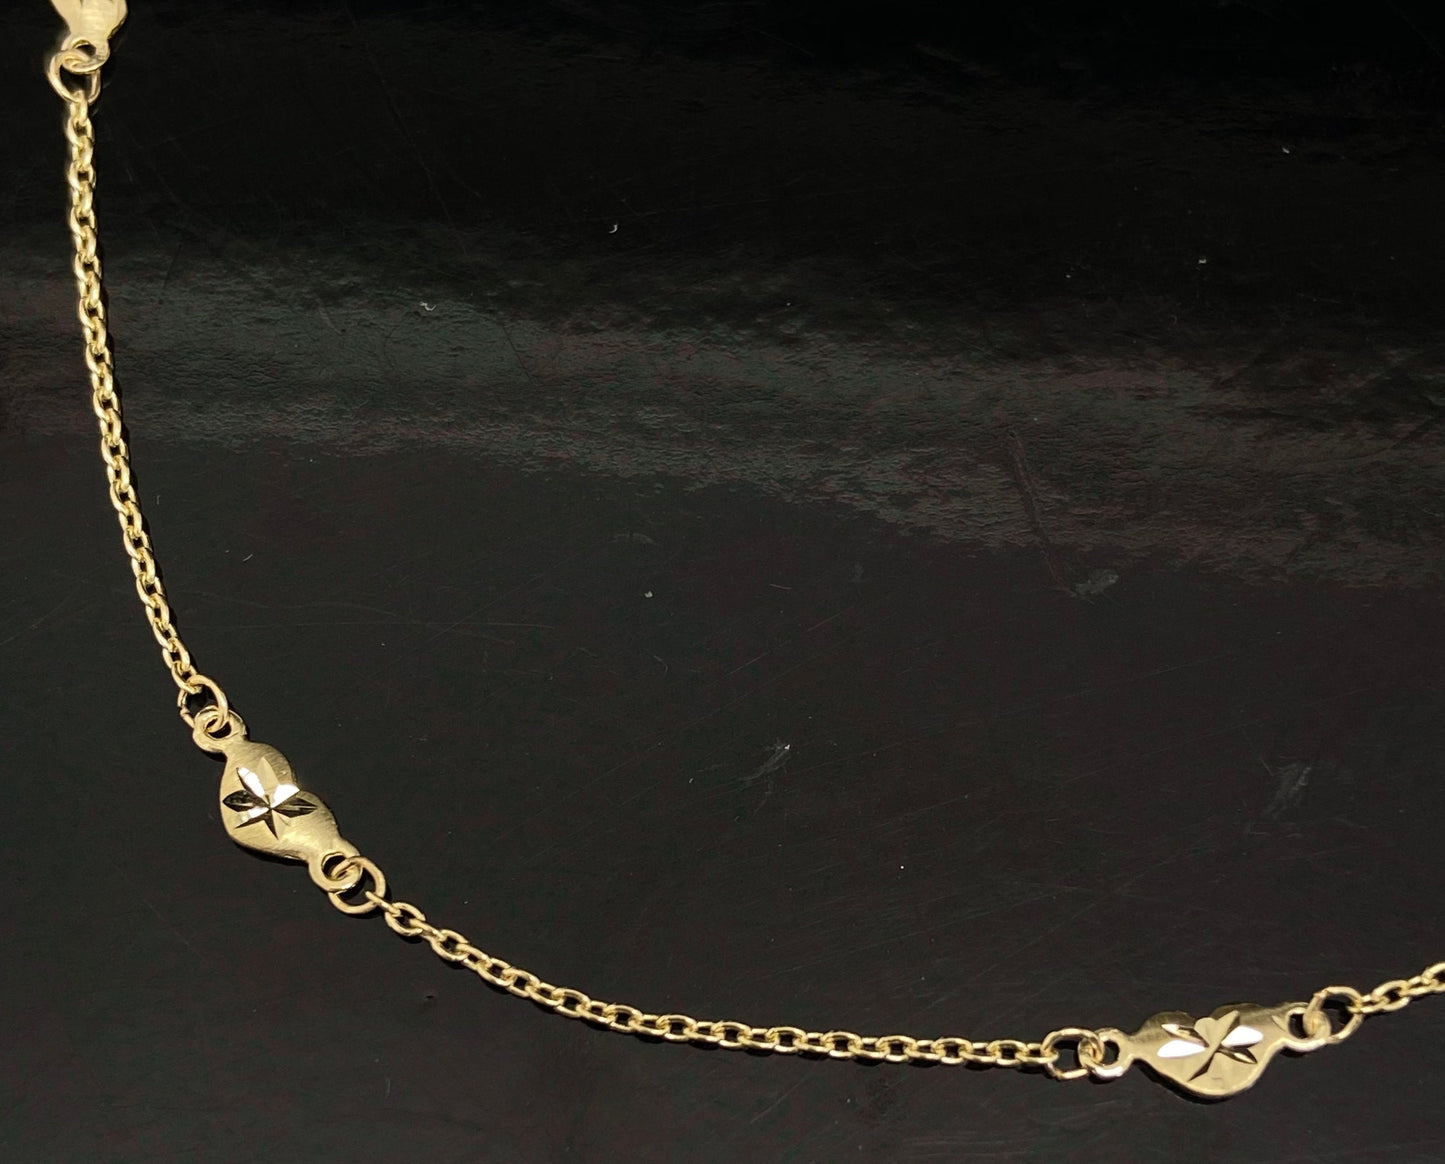 Yellow Gold Diamond-Cut Puffy Heart Station Chain Anklet Bracelet